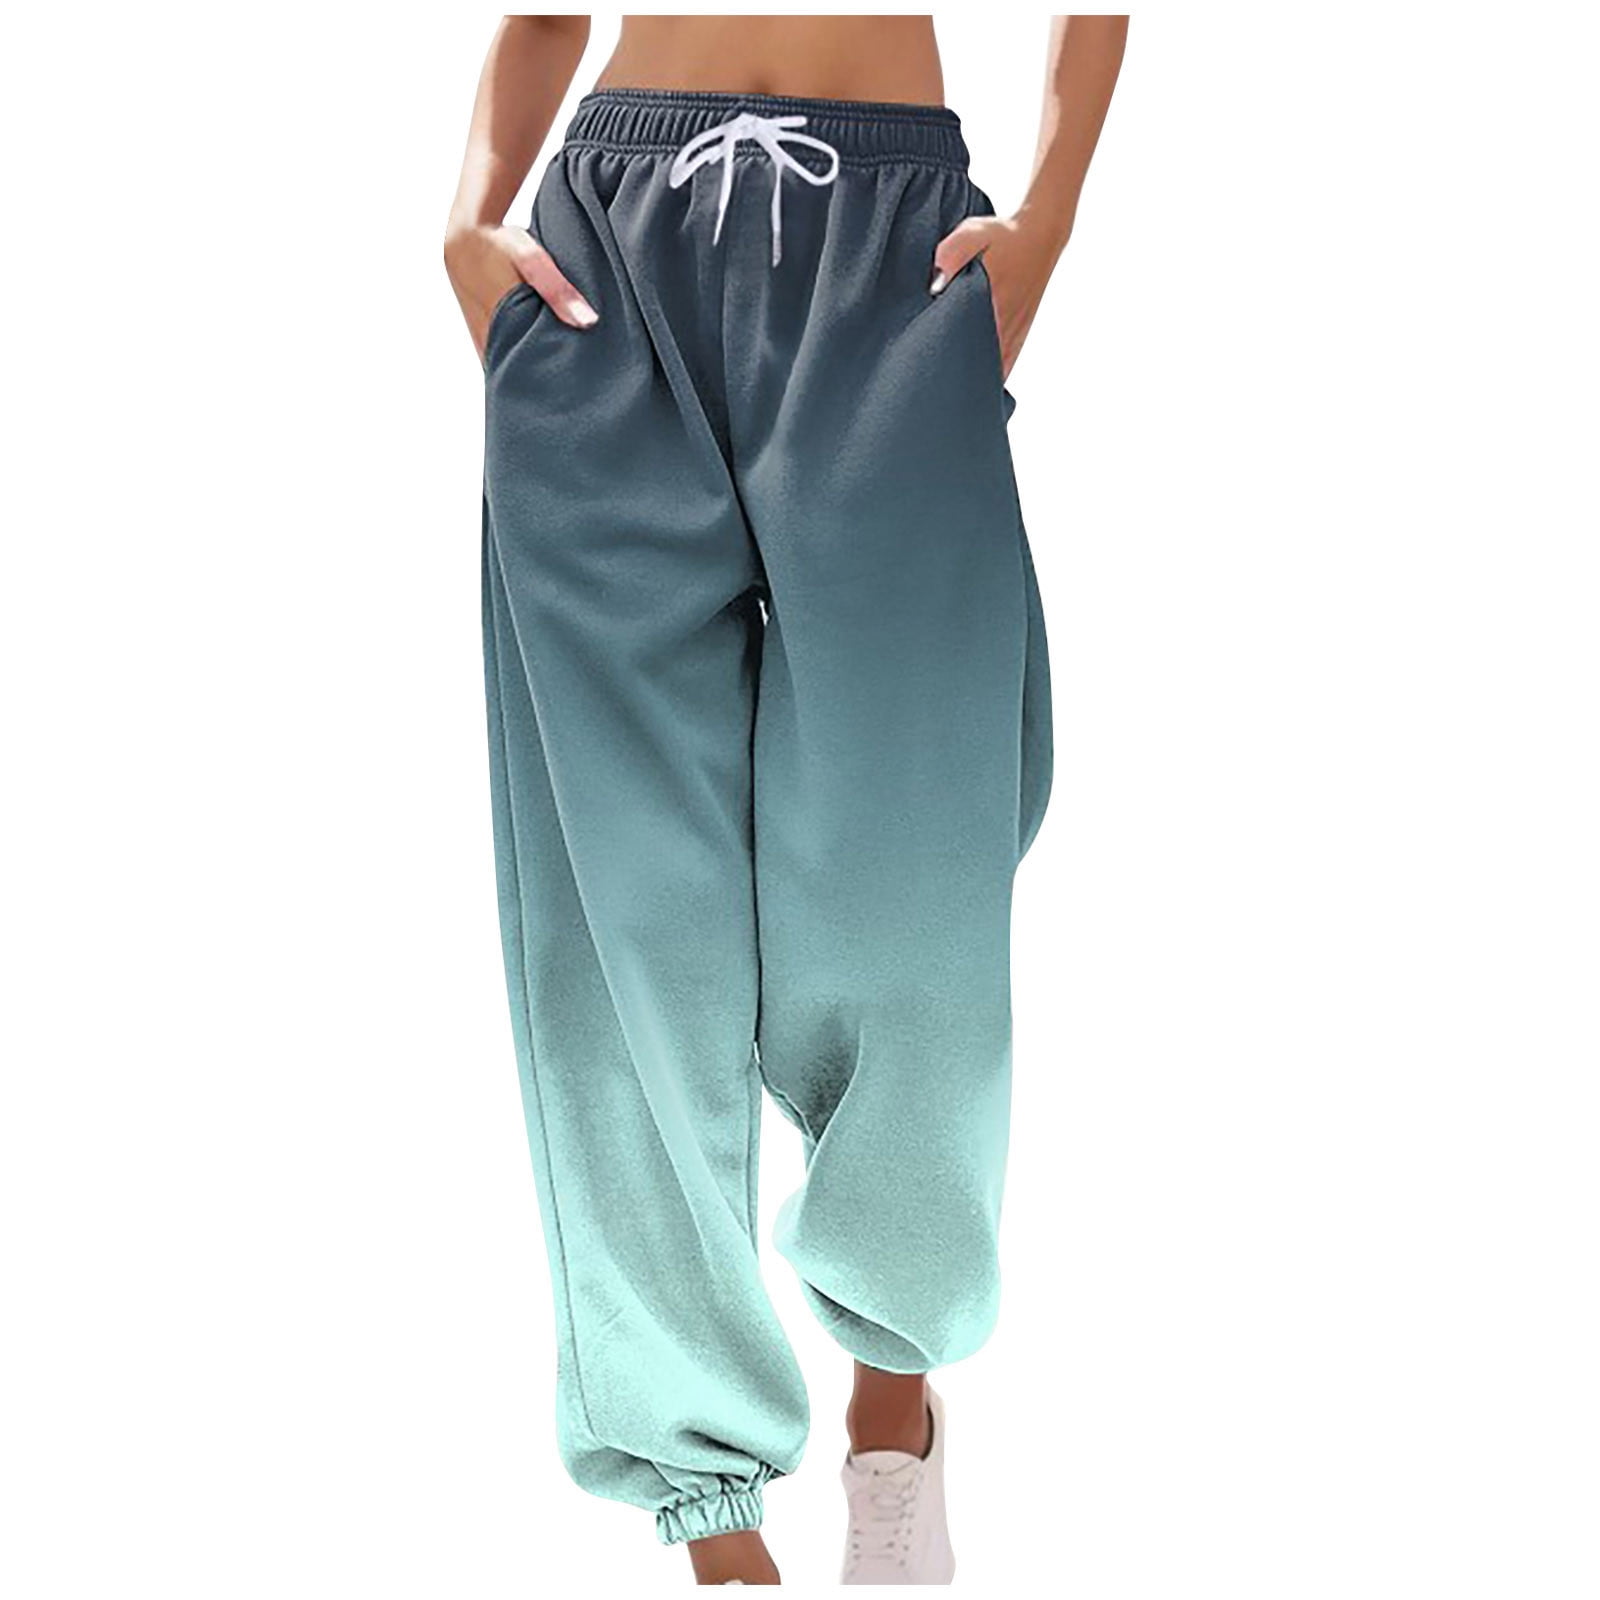 BUIgtTklOP Pants for Women Clearance,Women's Summer Casual Drawstring Solid  Cropped Pants 